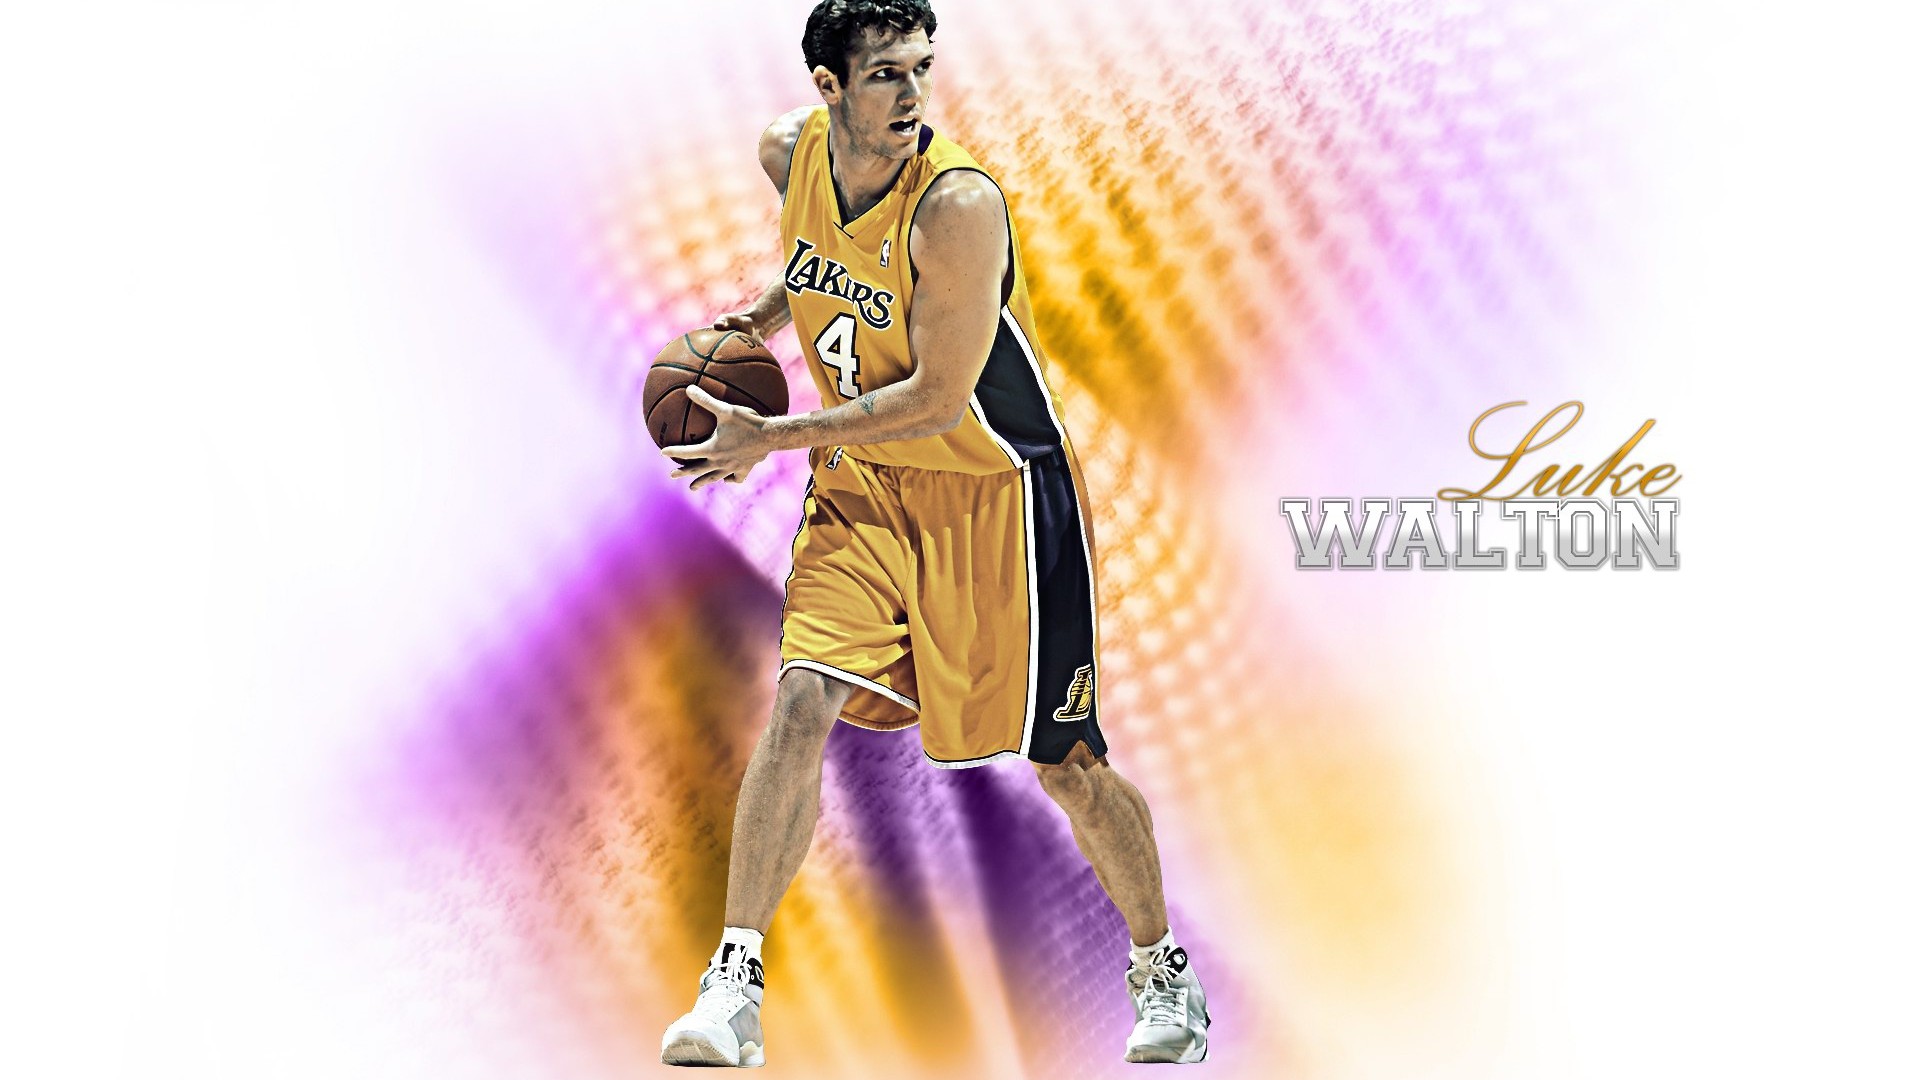 Los Angeles Lakers Wallpaper Oficial #19 - 1920x1080